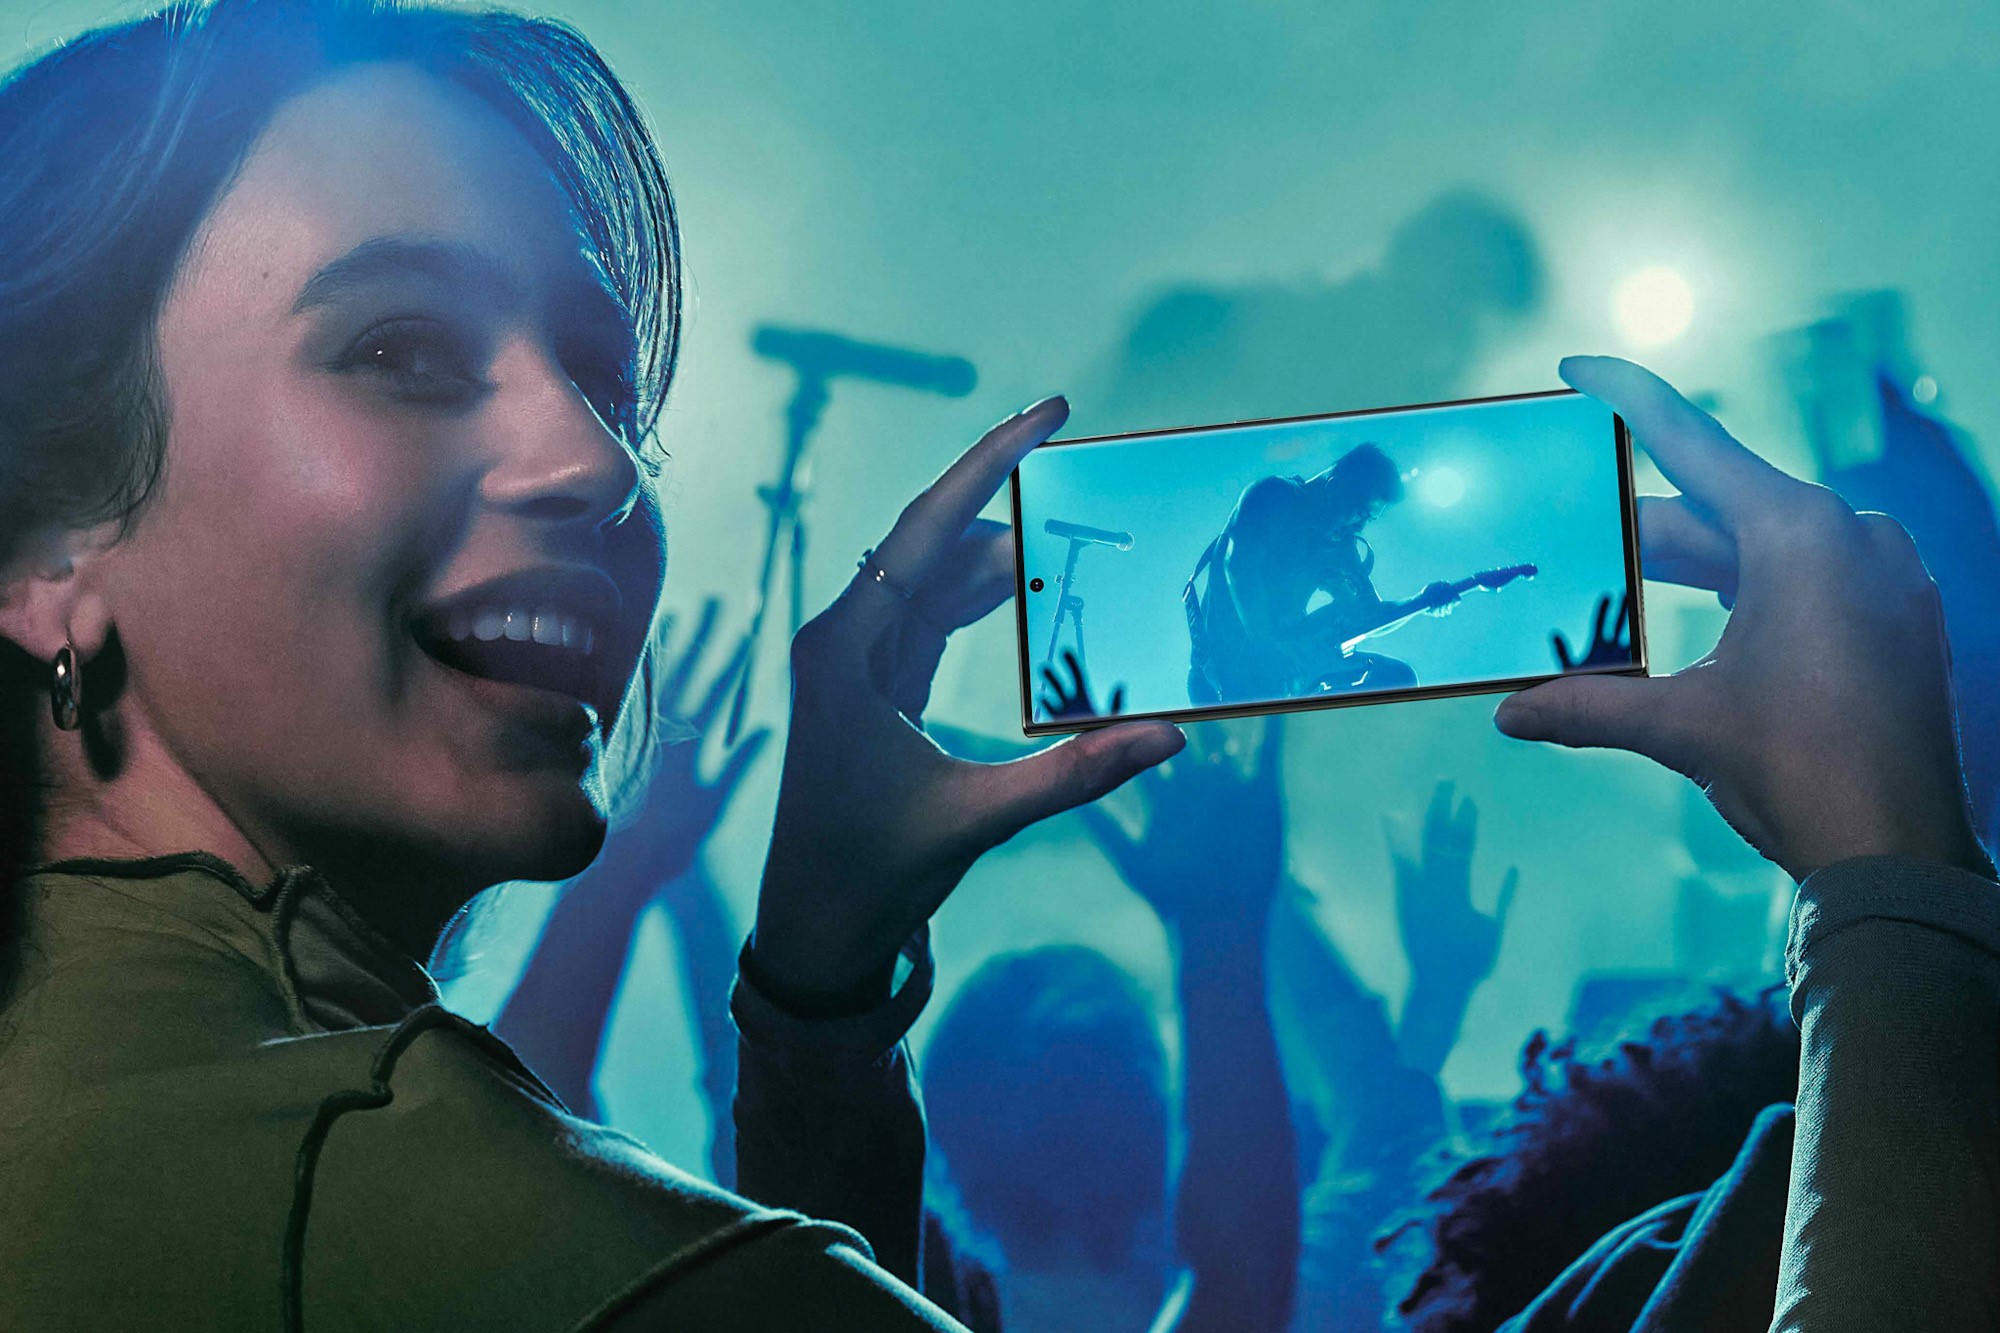 promotional image of a young woman using a Samsung Galaxy S23 smartphone at a concert